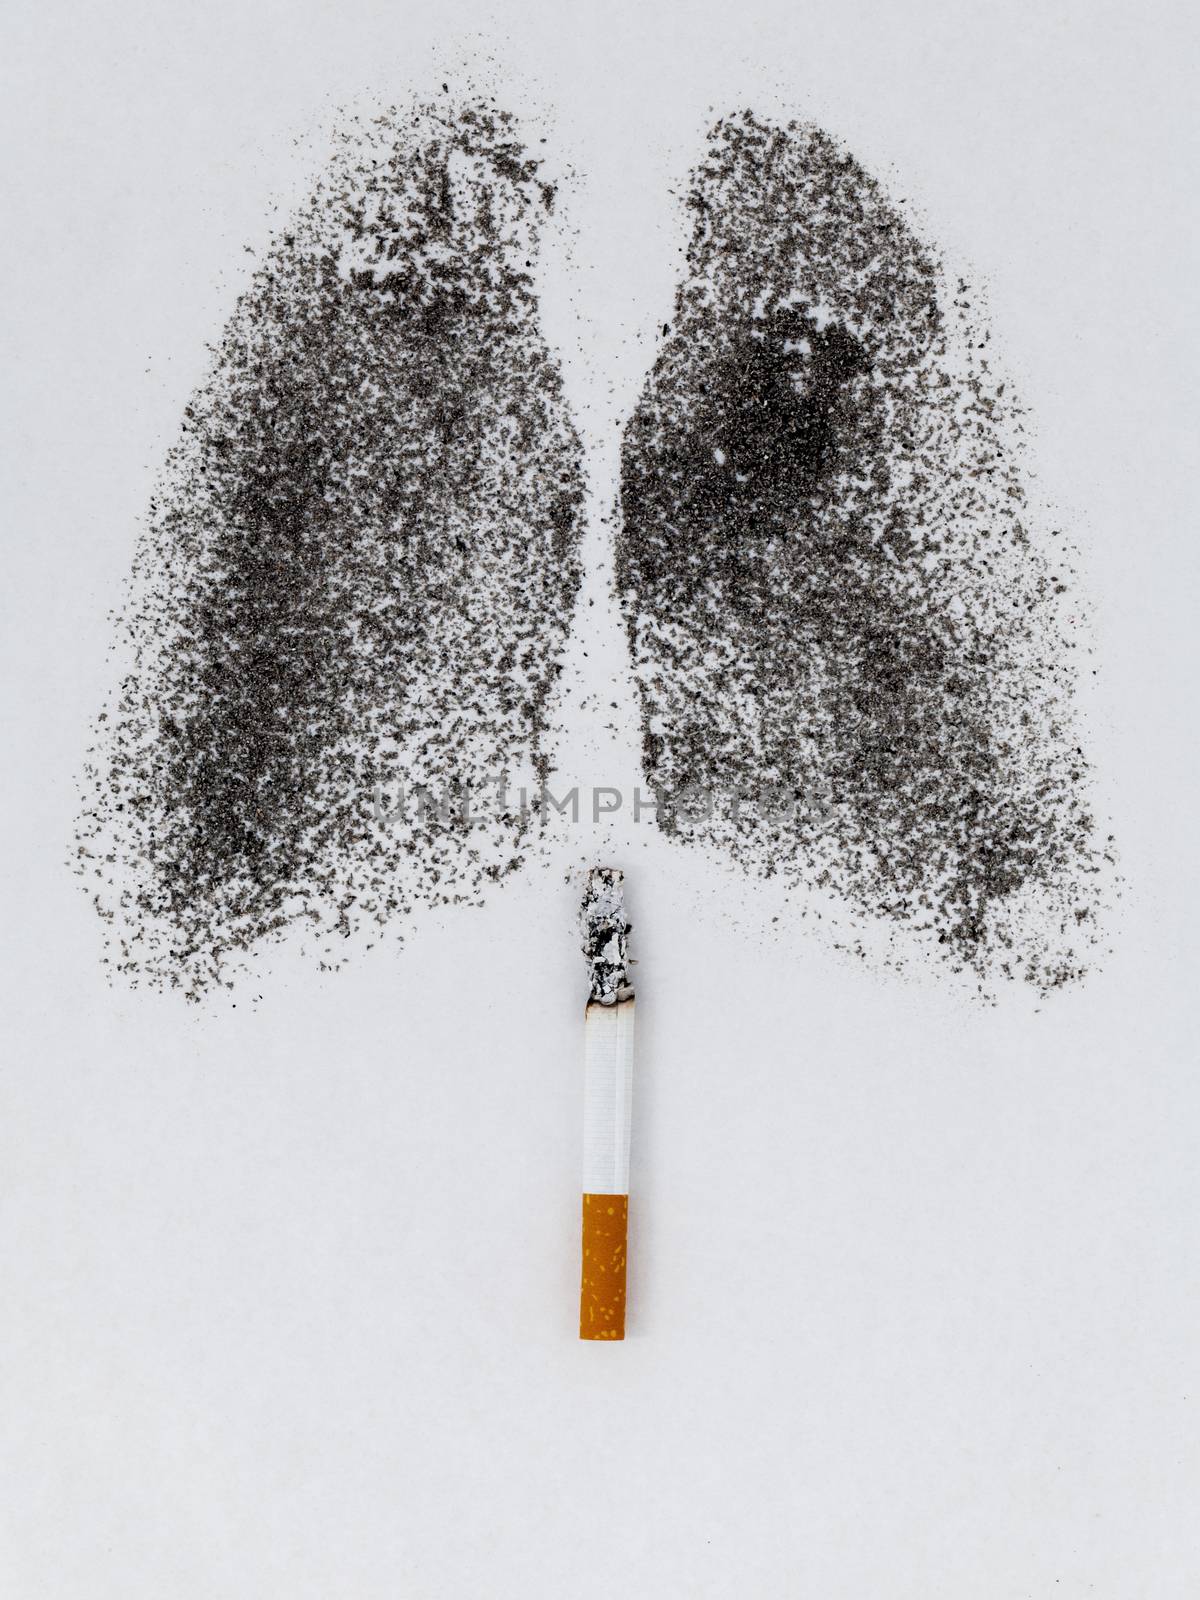 Shape of lungs with charcoal powder and cigarette on white backg by kerdkanno